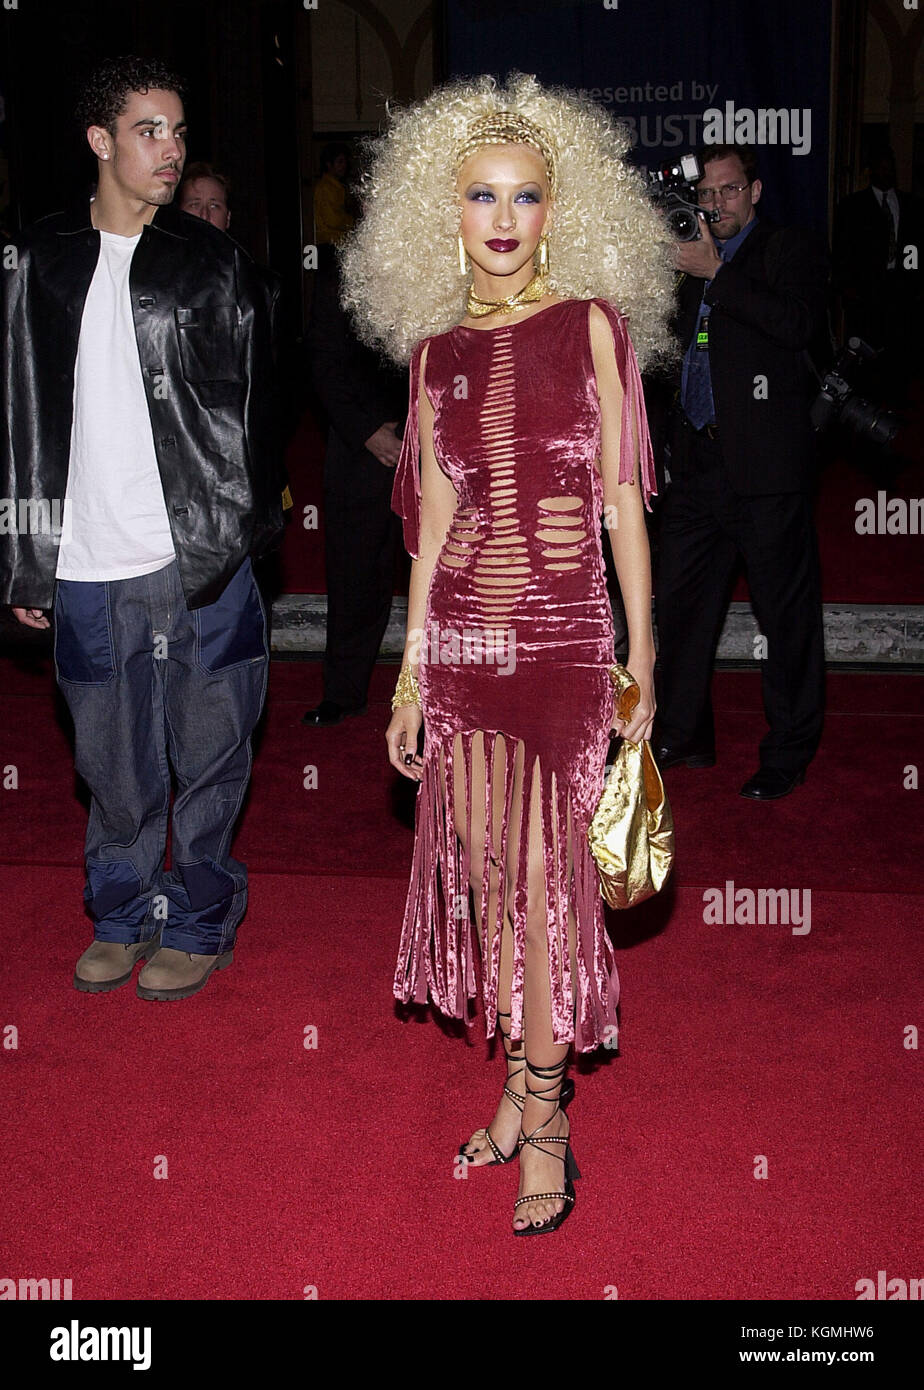 Christina Aguilera arriving at the 7th Annual Blockbuster Entertainment Awards  at the Shrine Auditorium in Los Angeles  4/10/2001 Christina Aguilera 099  = People, Vertical, Full Length, USA, California, City Of Los Angeles, One Person,  Portrait, Photography, Christina Aguilera, Arts Culture and Entertainment, Looking at the Camera, Christina Aguilera 099  = People, Vertical, Full Length, USA, California, City Of Los Angeles, One Person,  Portrait, Photography, Christina Aguilera, Arts Culture and Entertainment, Looking at the Camera, Wavy Hair Stock Photo